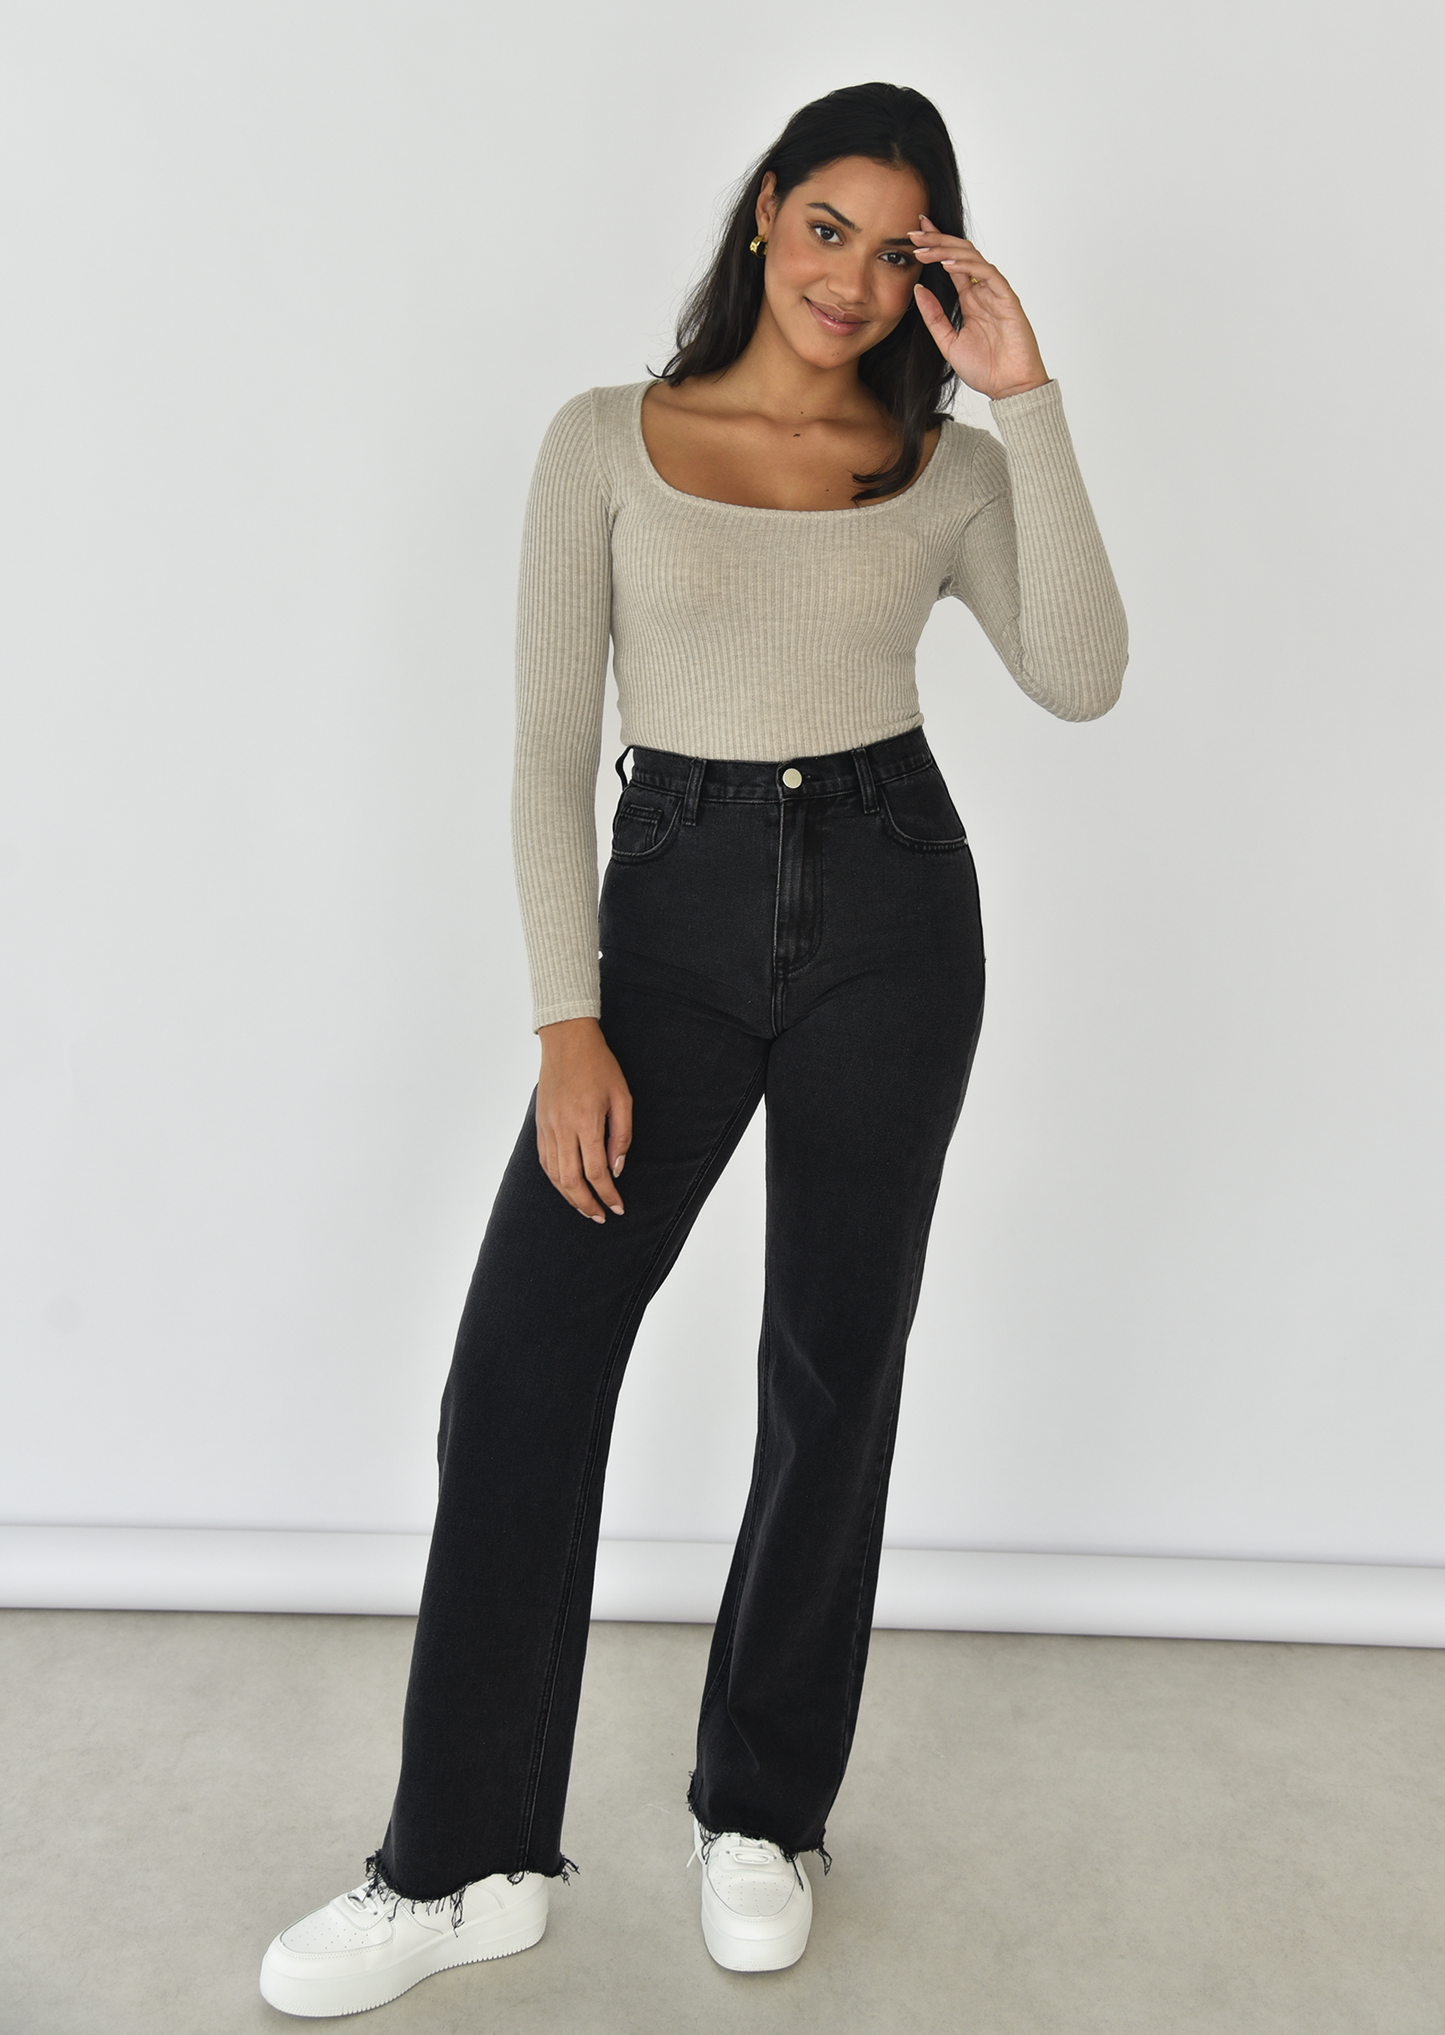 Ribbed top with square neck